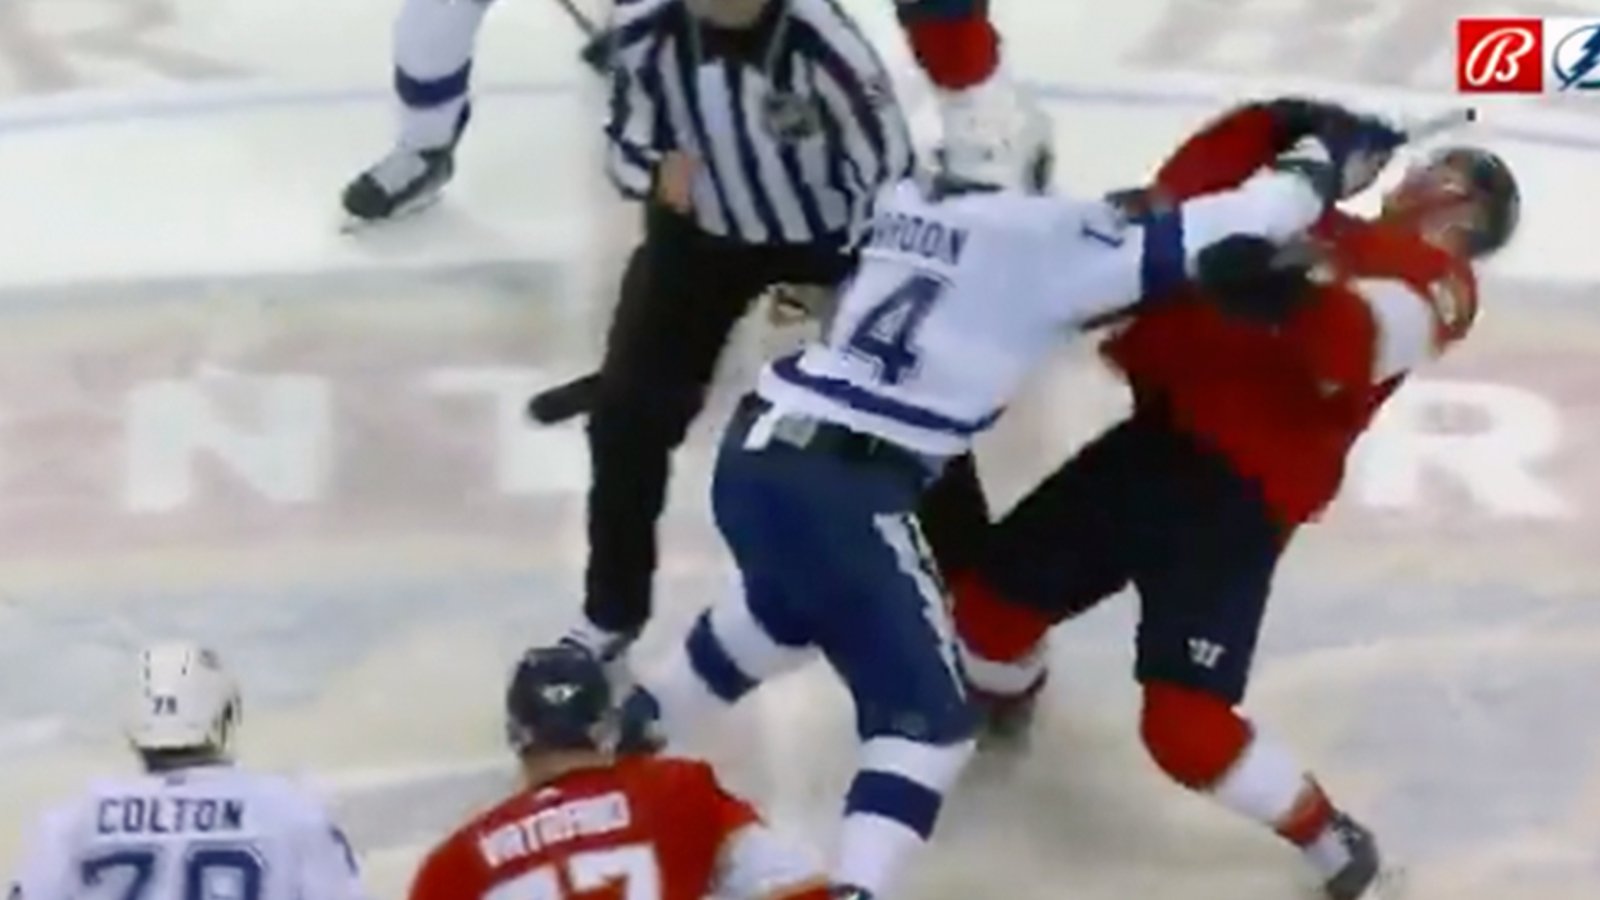 Pat Maroon punished by NHL Player Safety for “unsportsmanlike conduct”